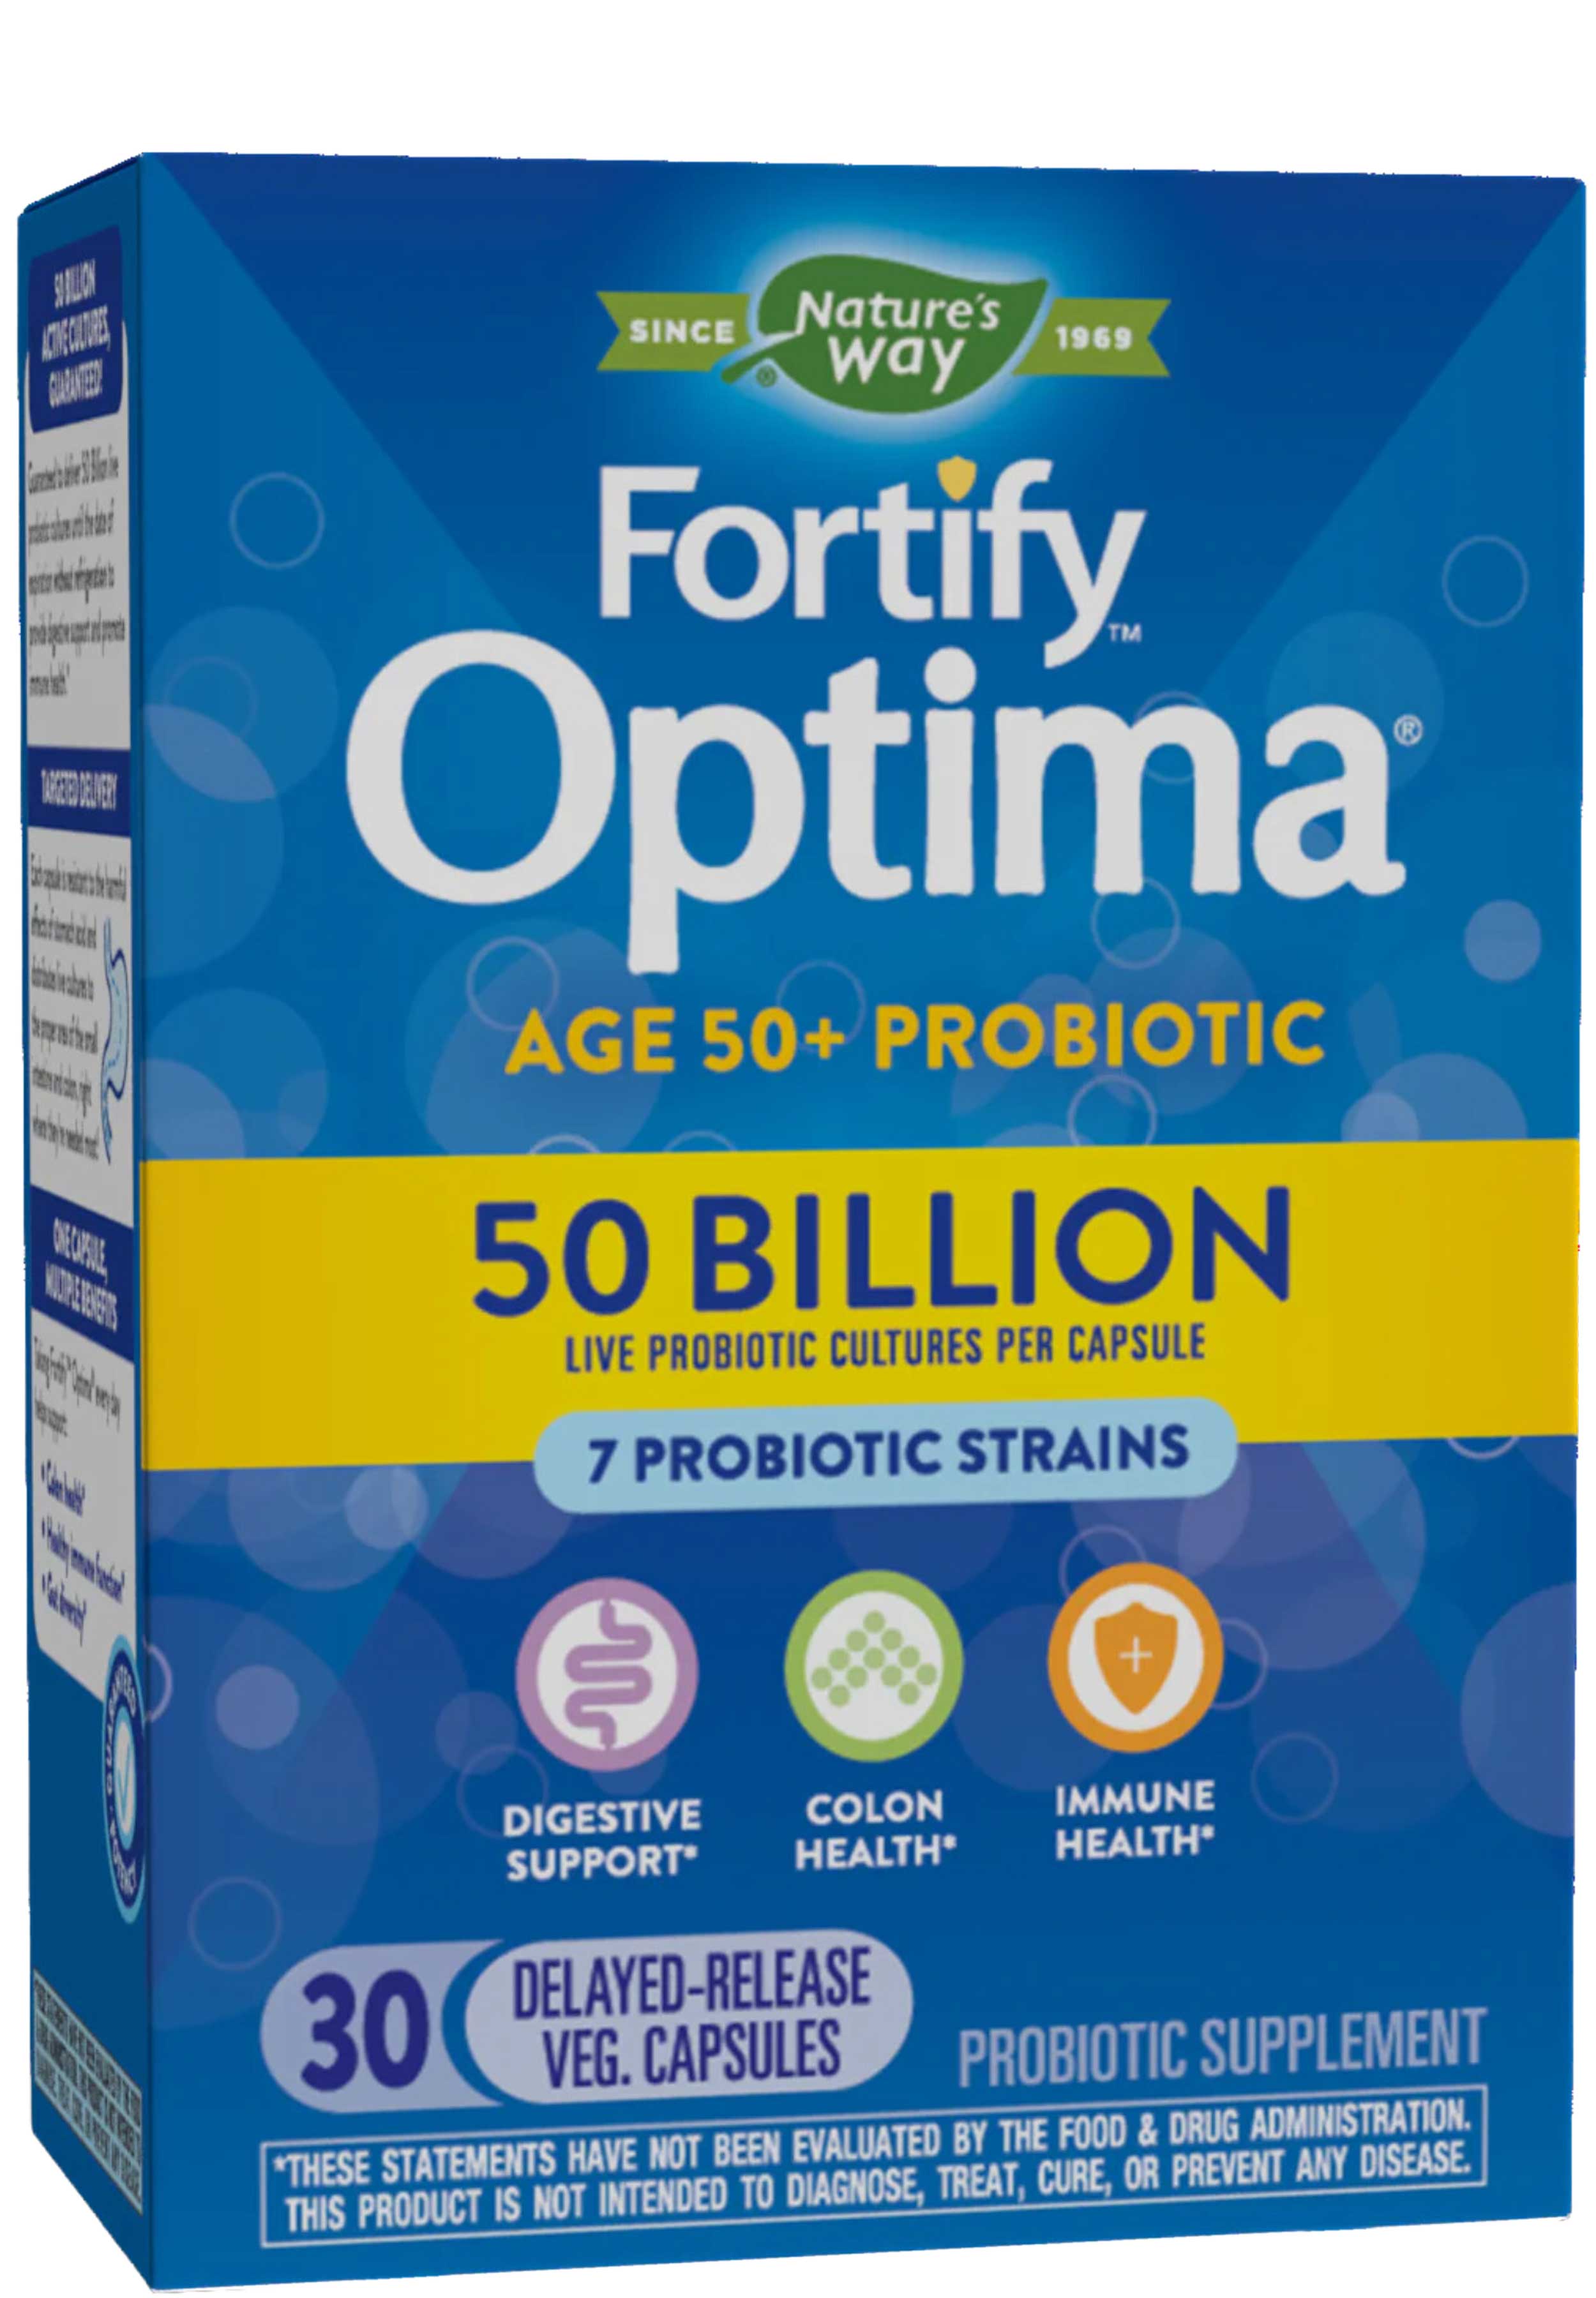 Nature's Way Fortify Optima Adult 50+ 50 Billion Probiotic